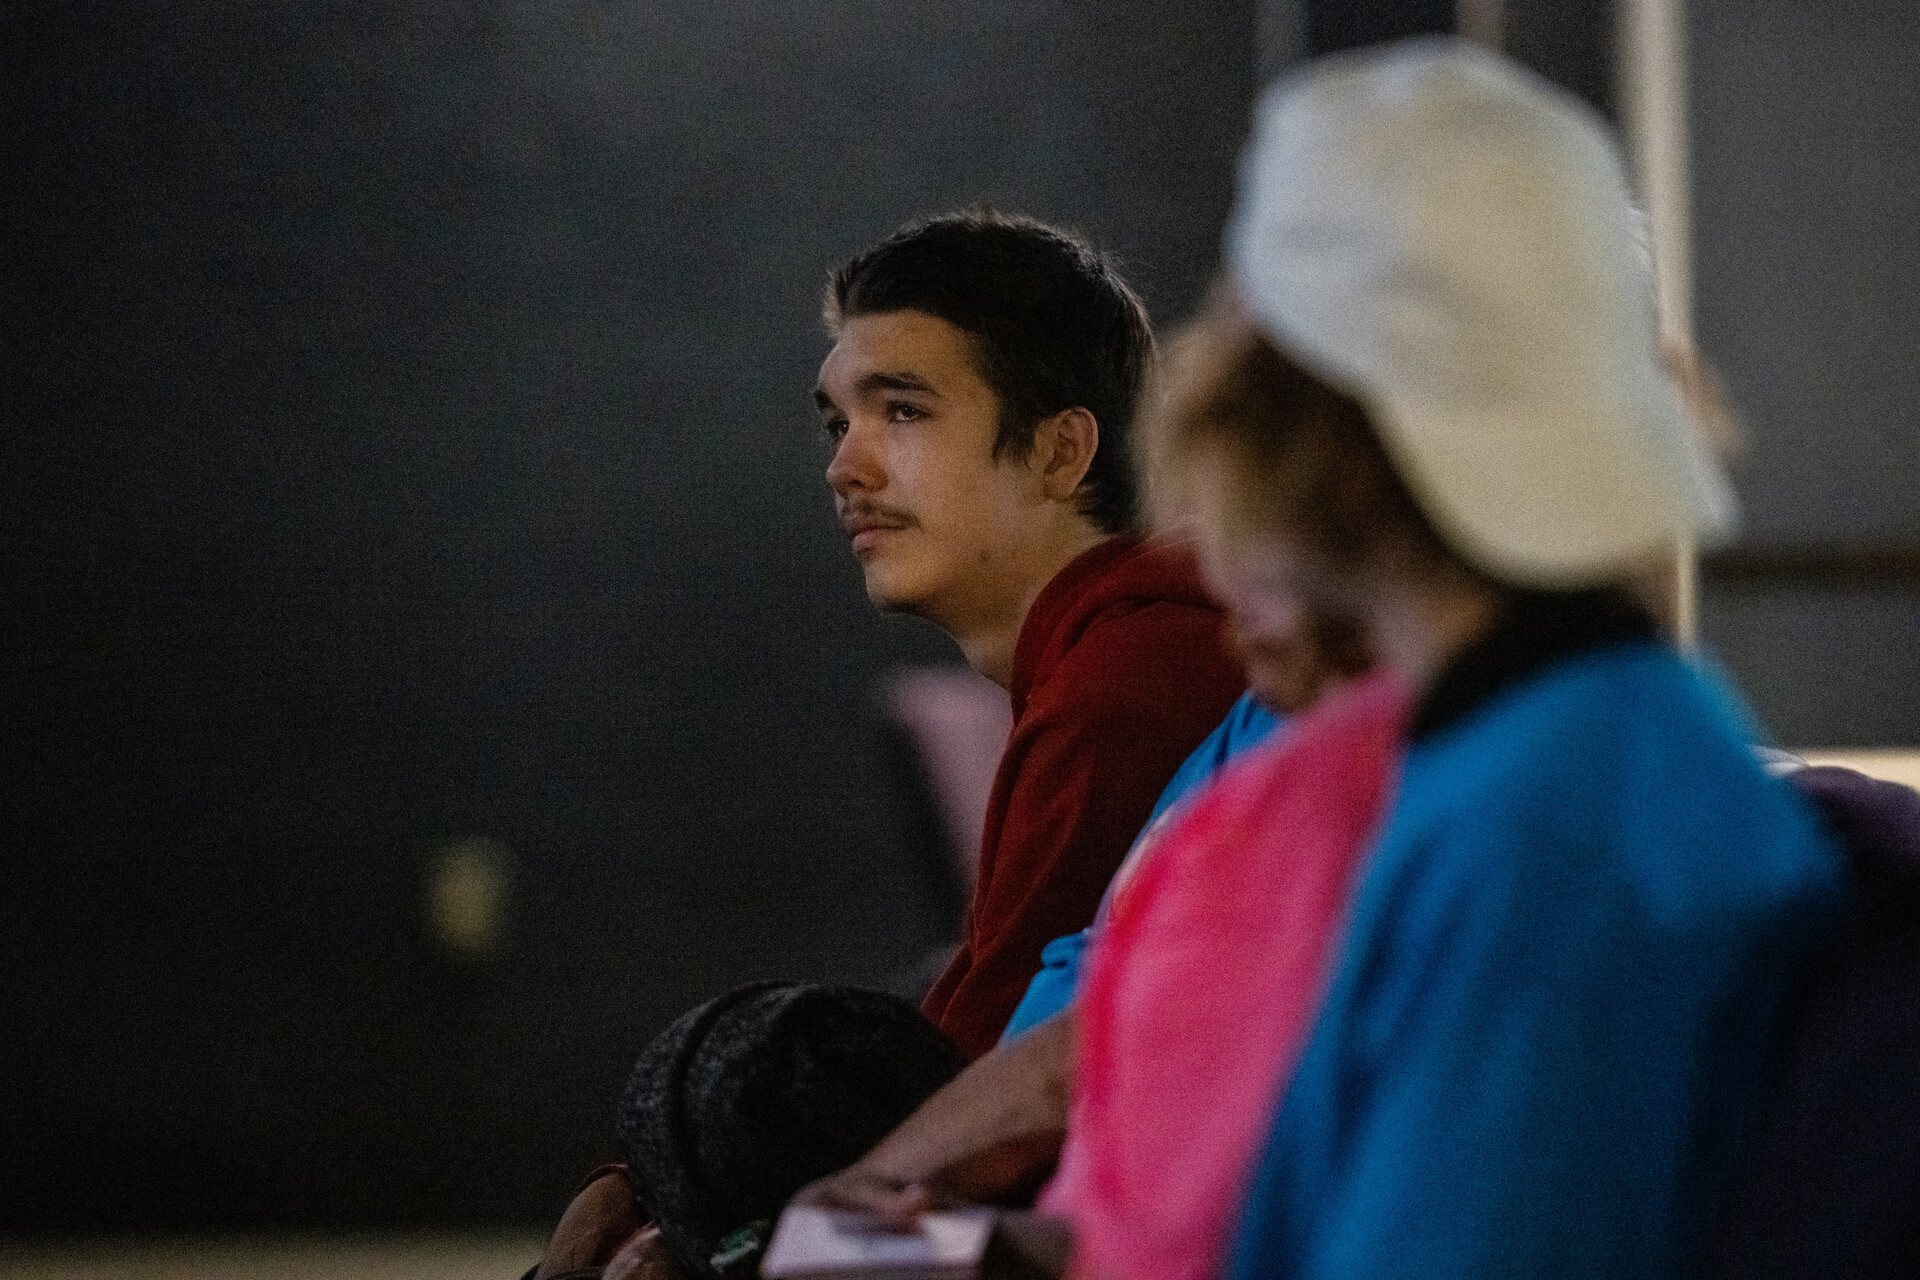 A young man with short, brown hair and a red hoodie sits in a row among family inside a church where a funeral is being held for his partner and his baby who were killed in a mass shooting. His face is heartbroken.